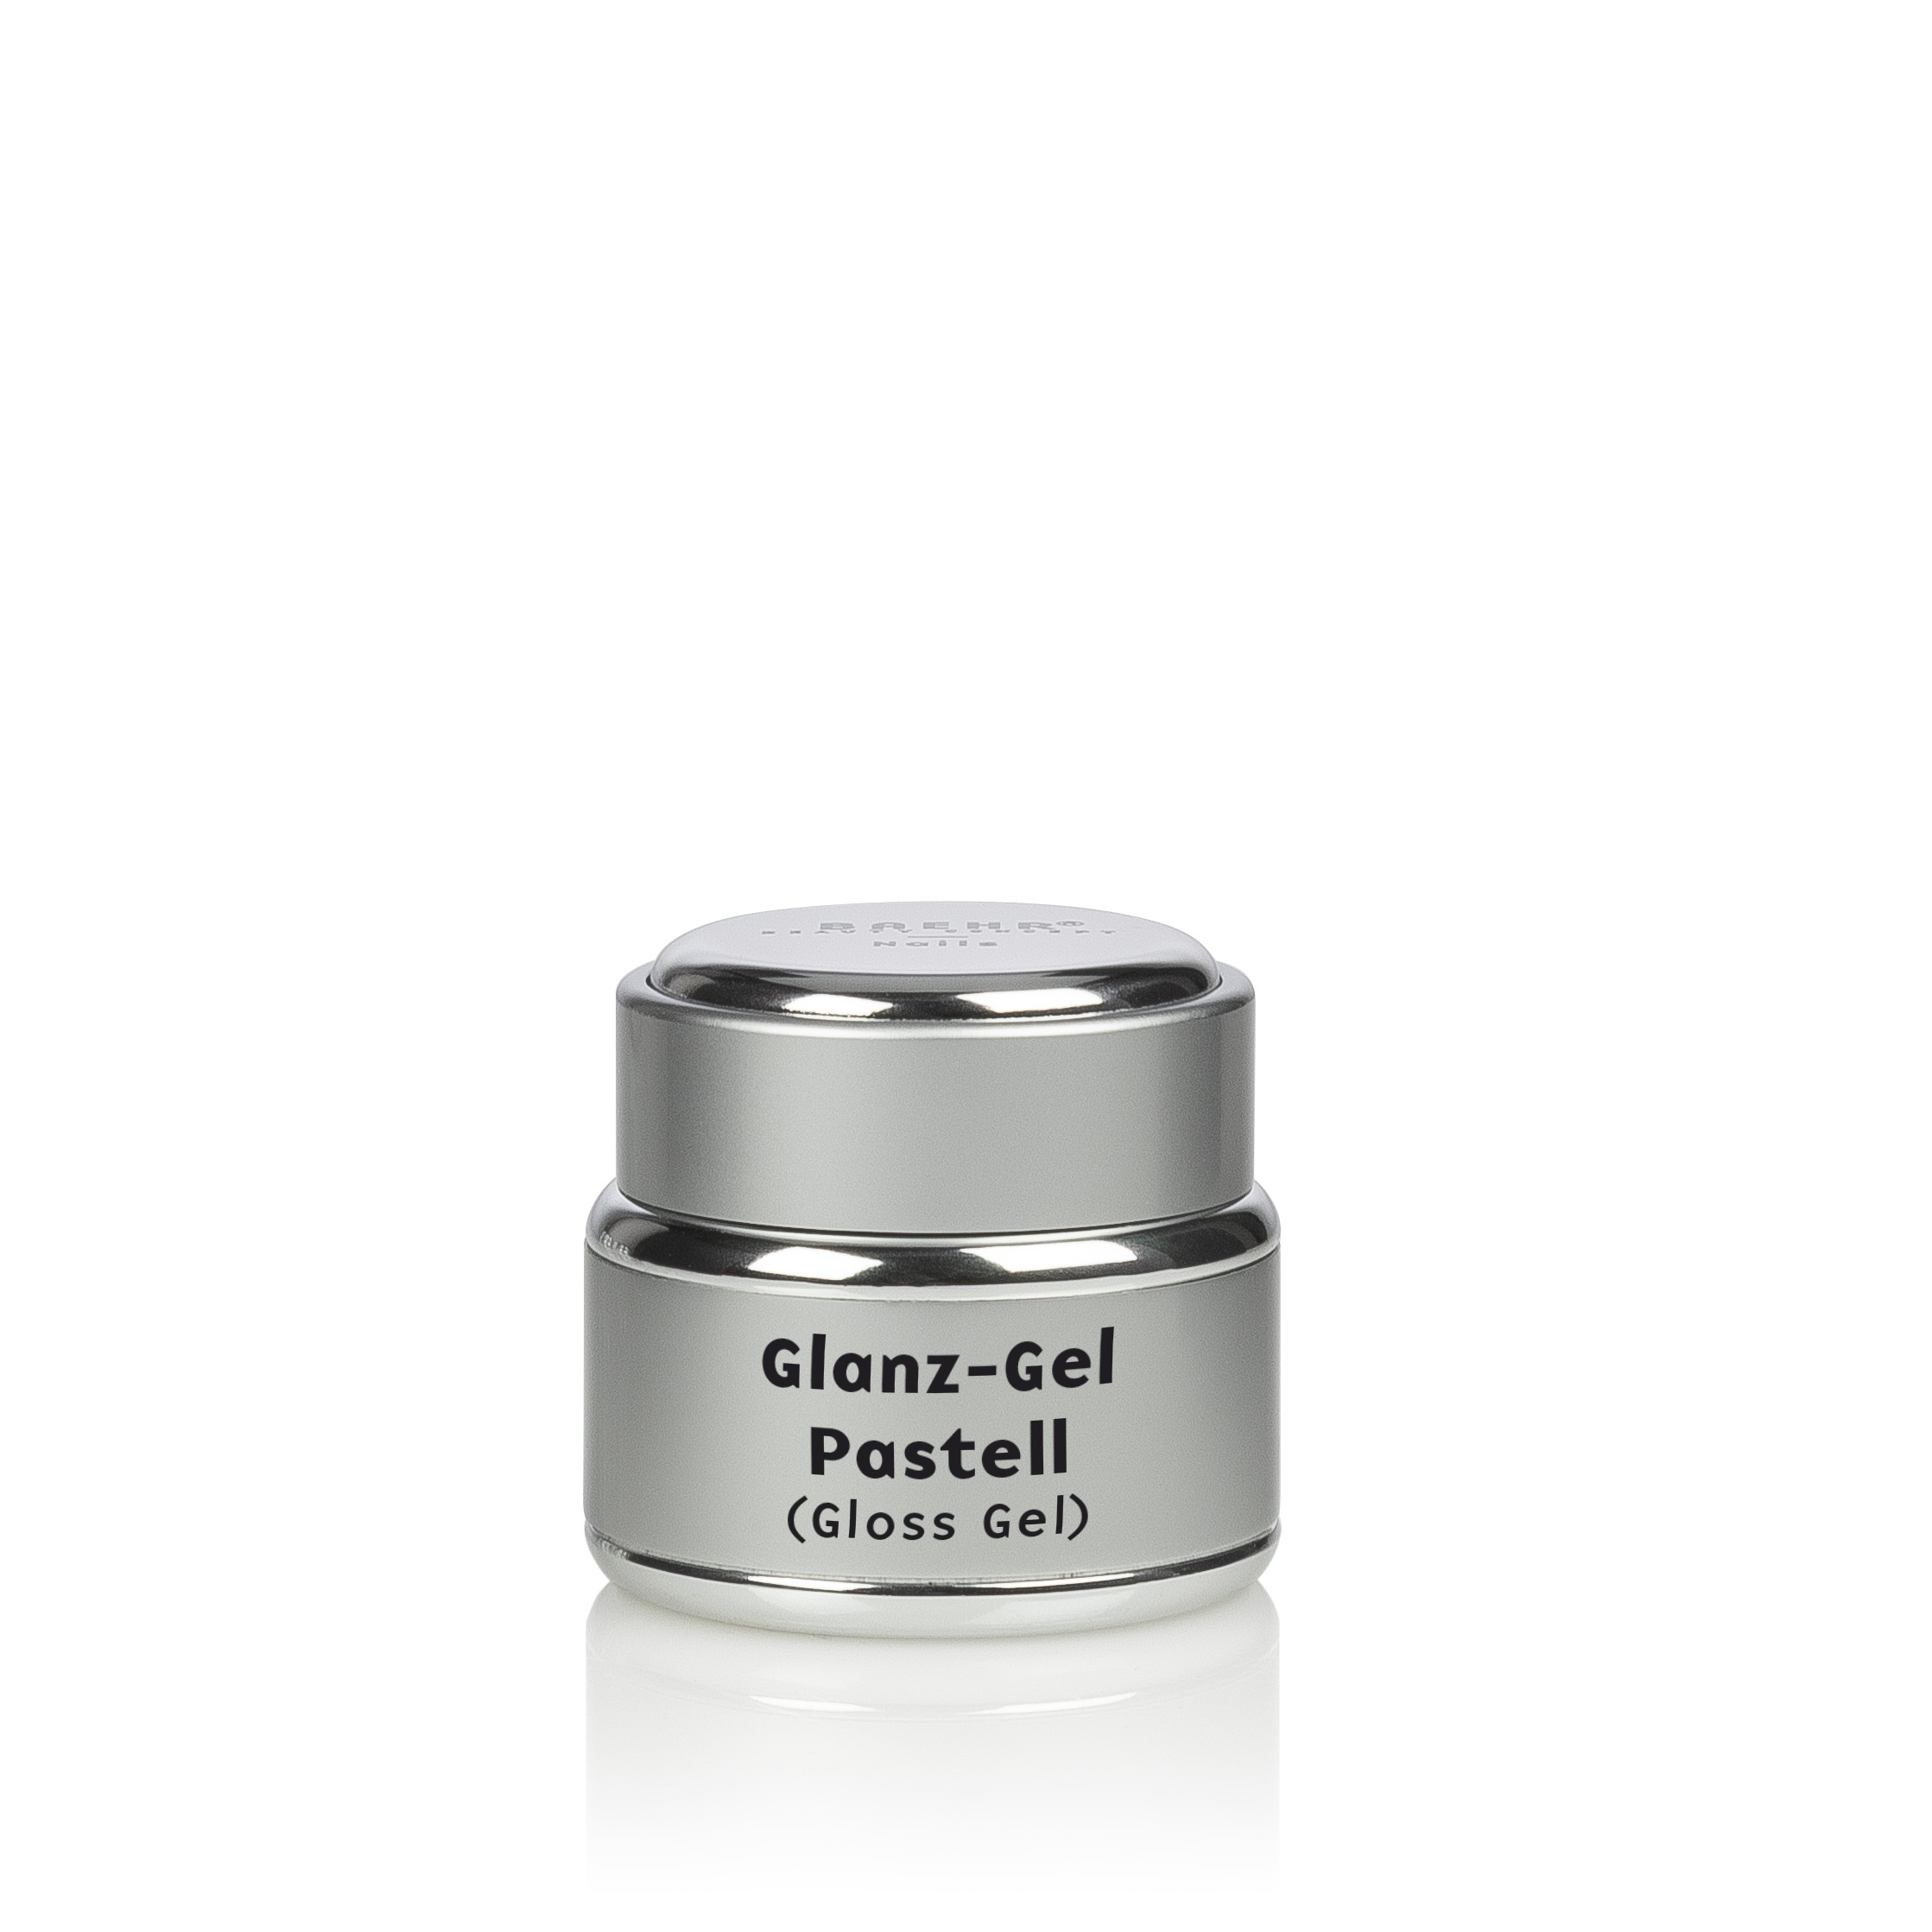 BAEHR BEAUTY CONCEPT - NAILS Glanz-Gel Pastell 5 ml